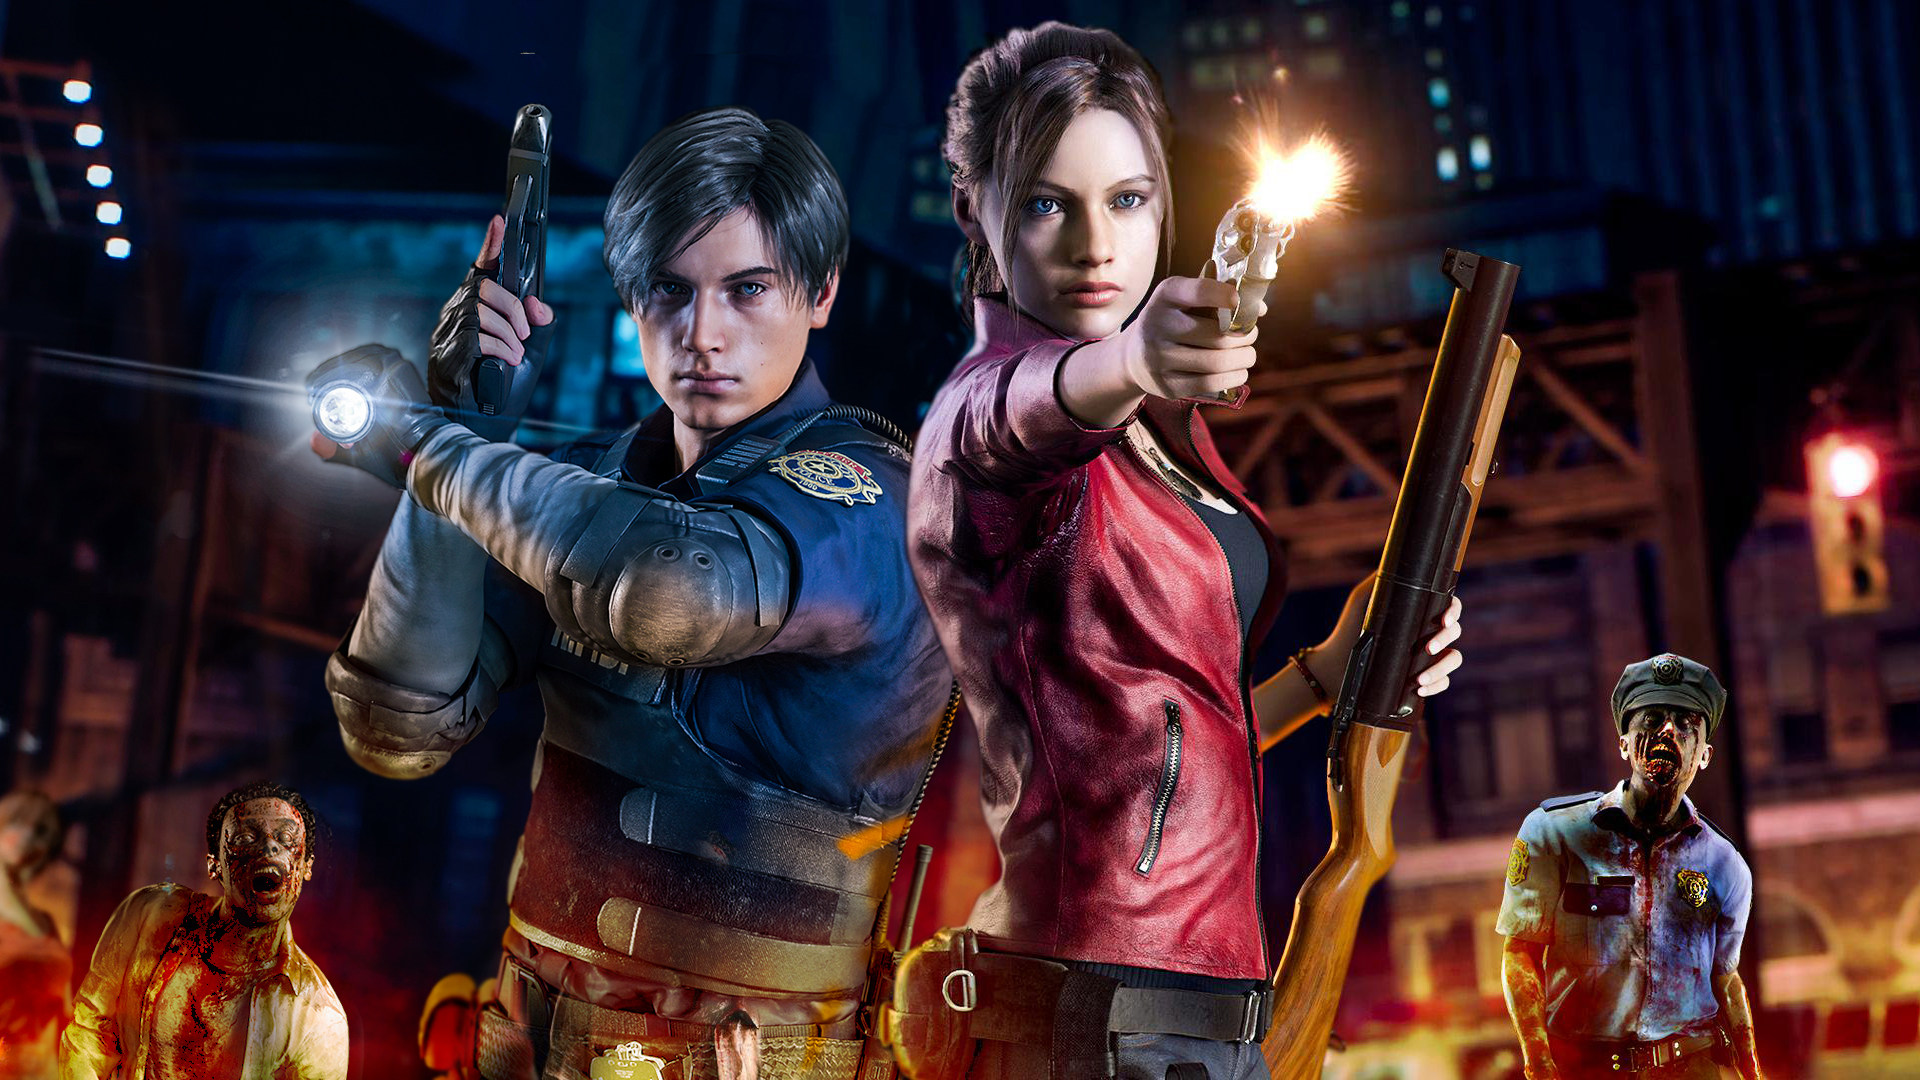 1920X1080 Resident Evil 2 Remake - Wallpaper Claire and Leon by Moresense o...